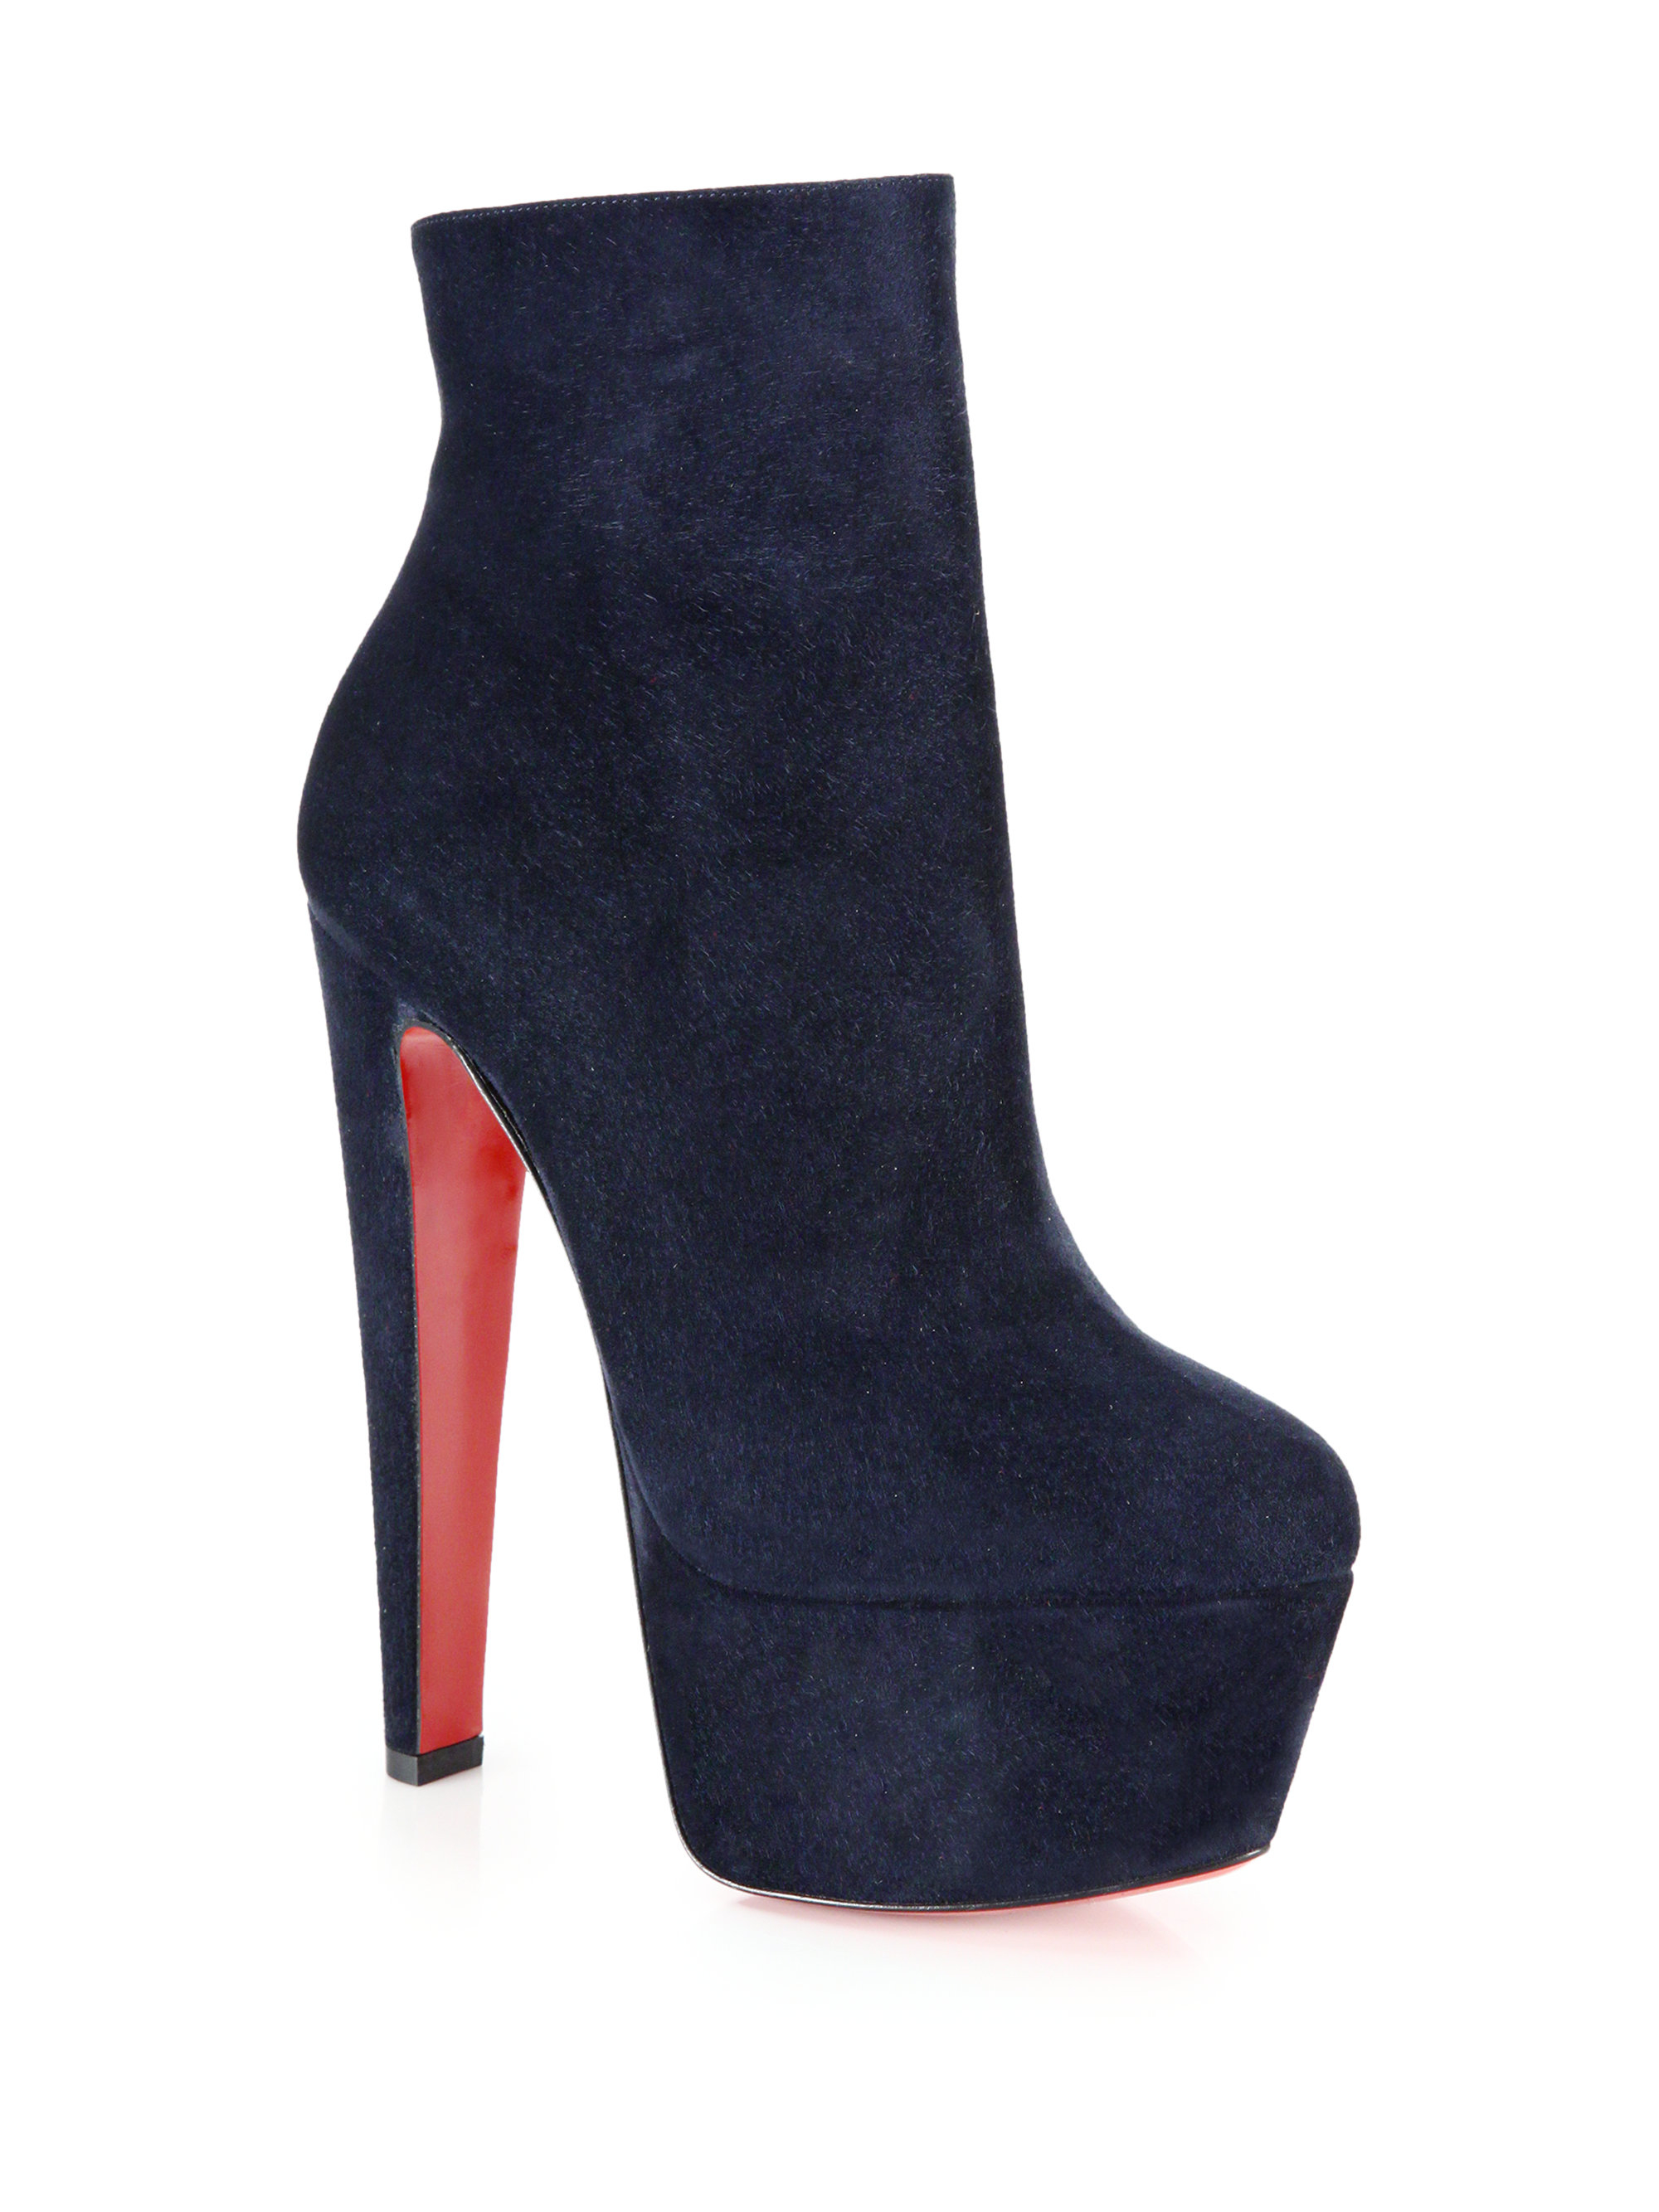 christian louboutin suede boots Dark 